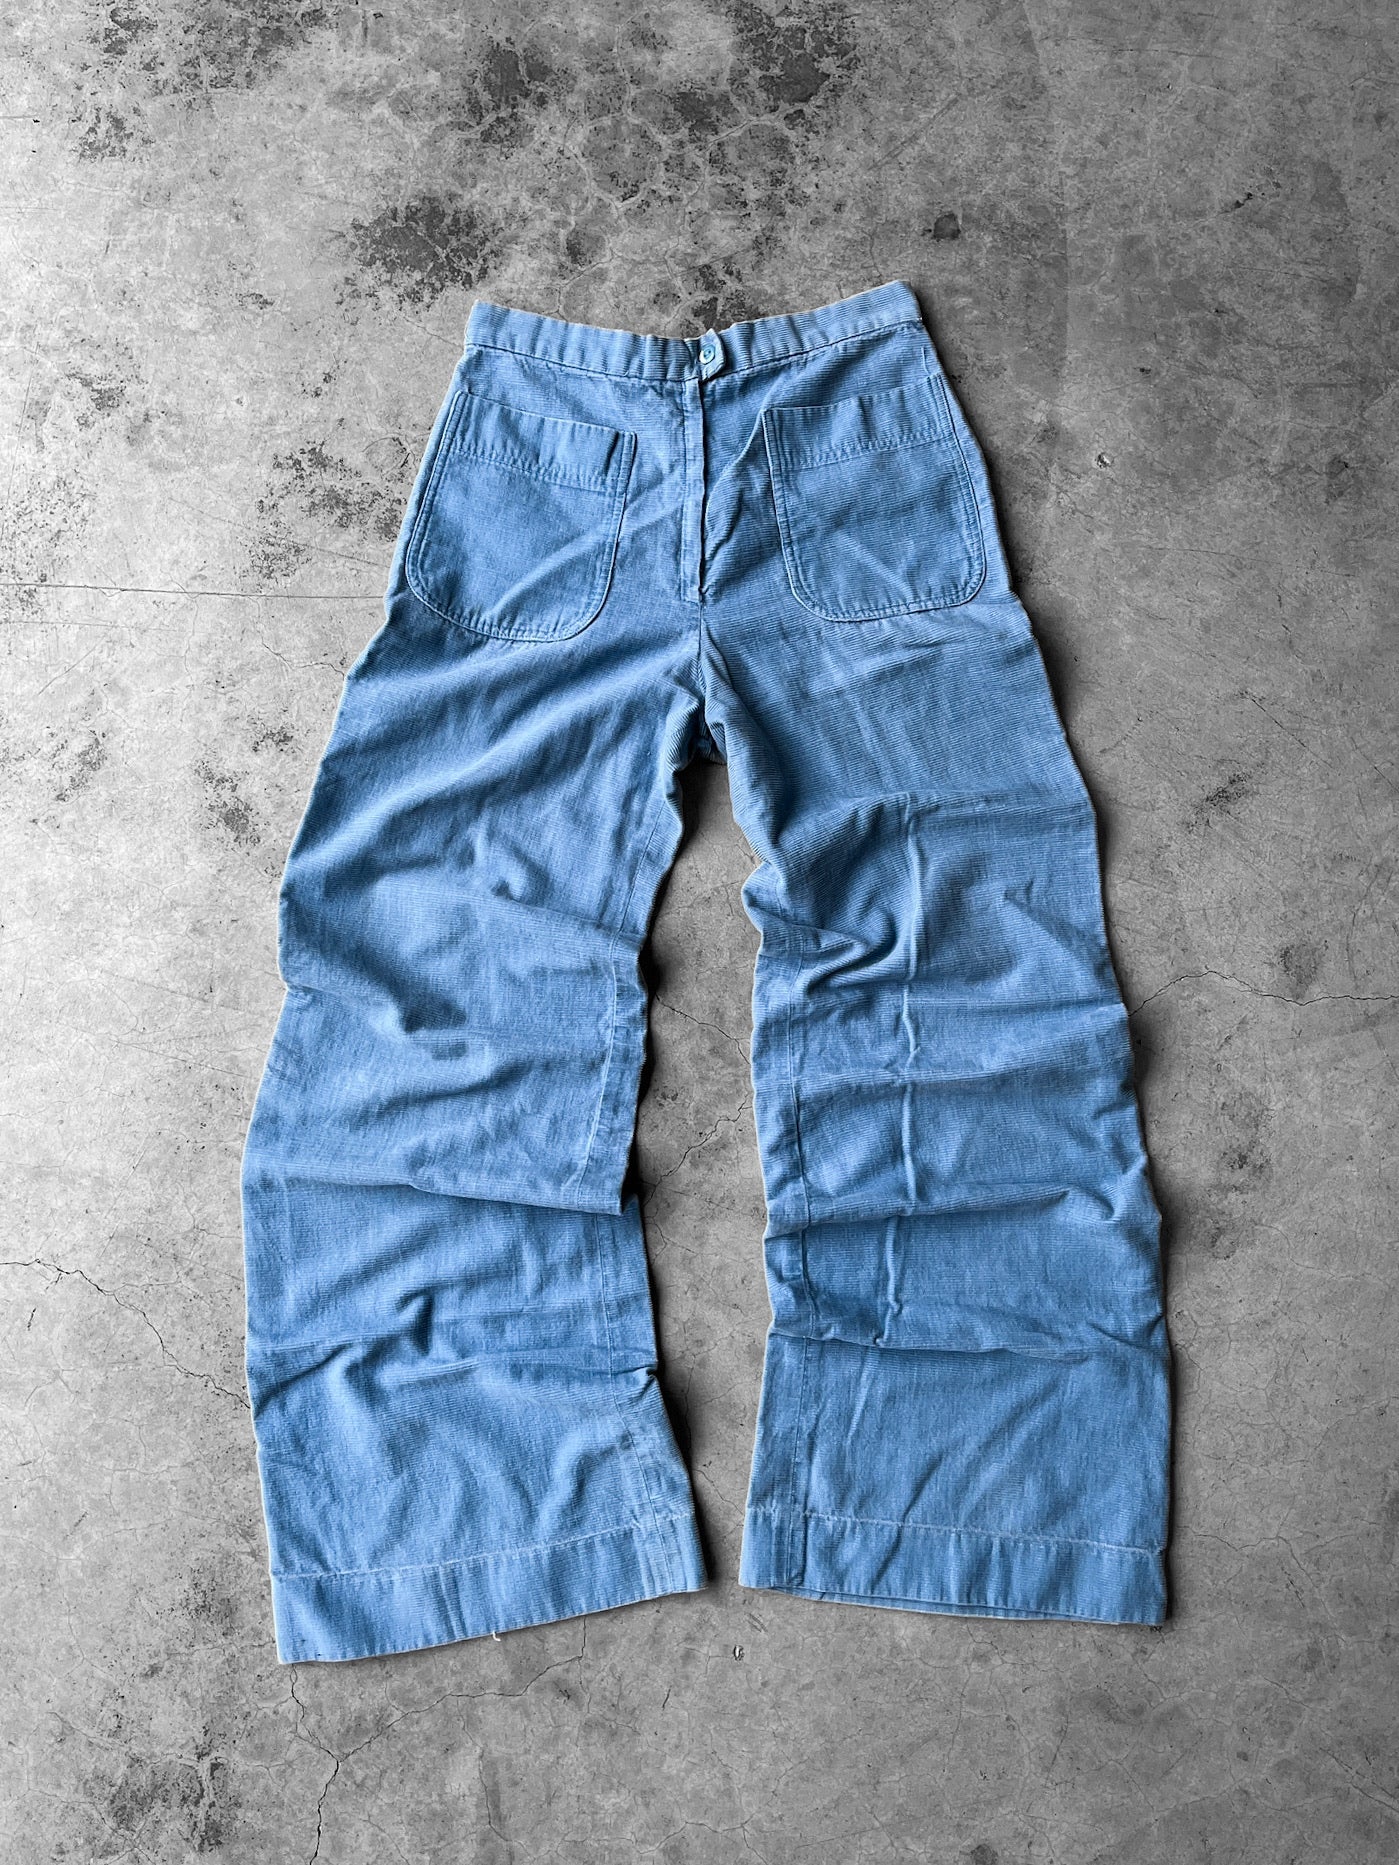 70's Hathaway Patch Baby Blue Corduroy Flared Pants - 11/12